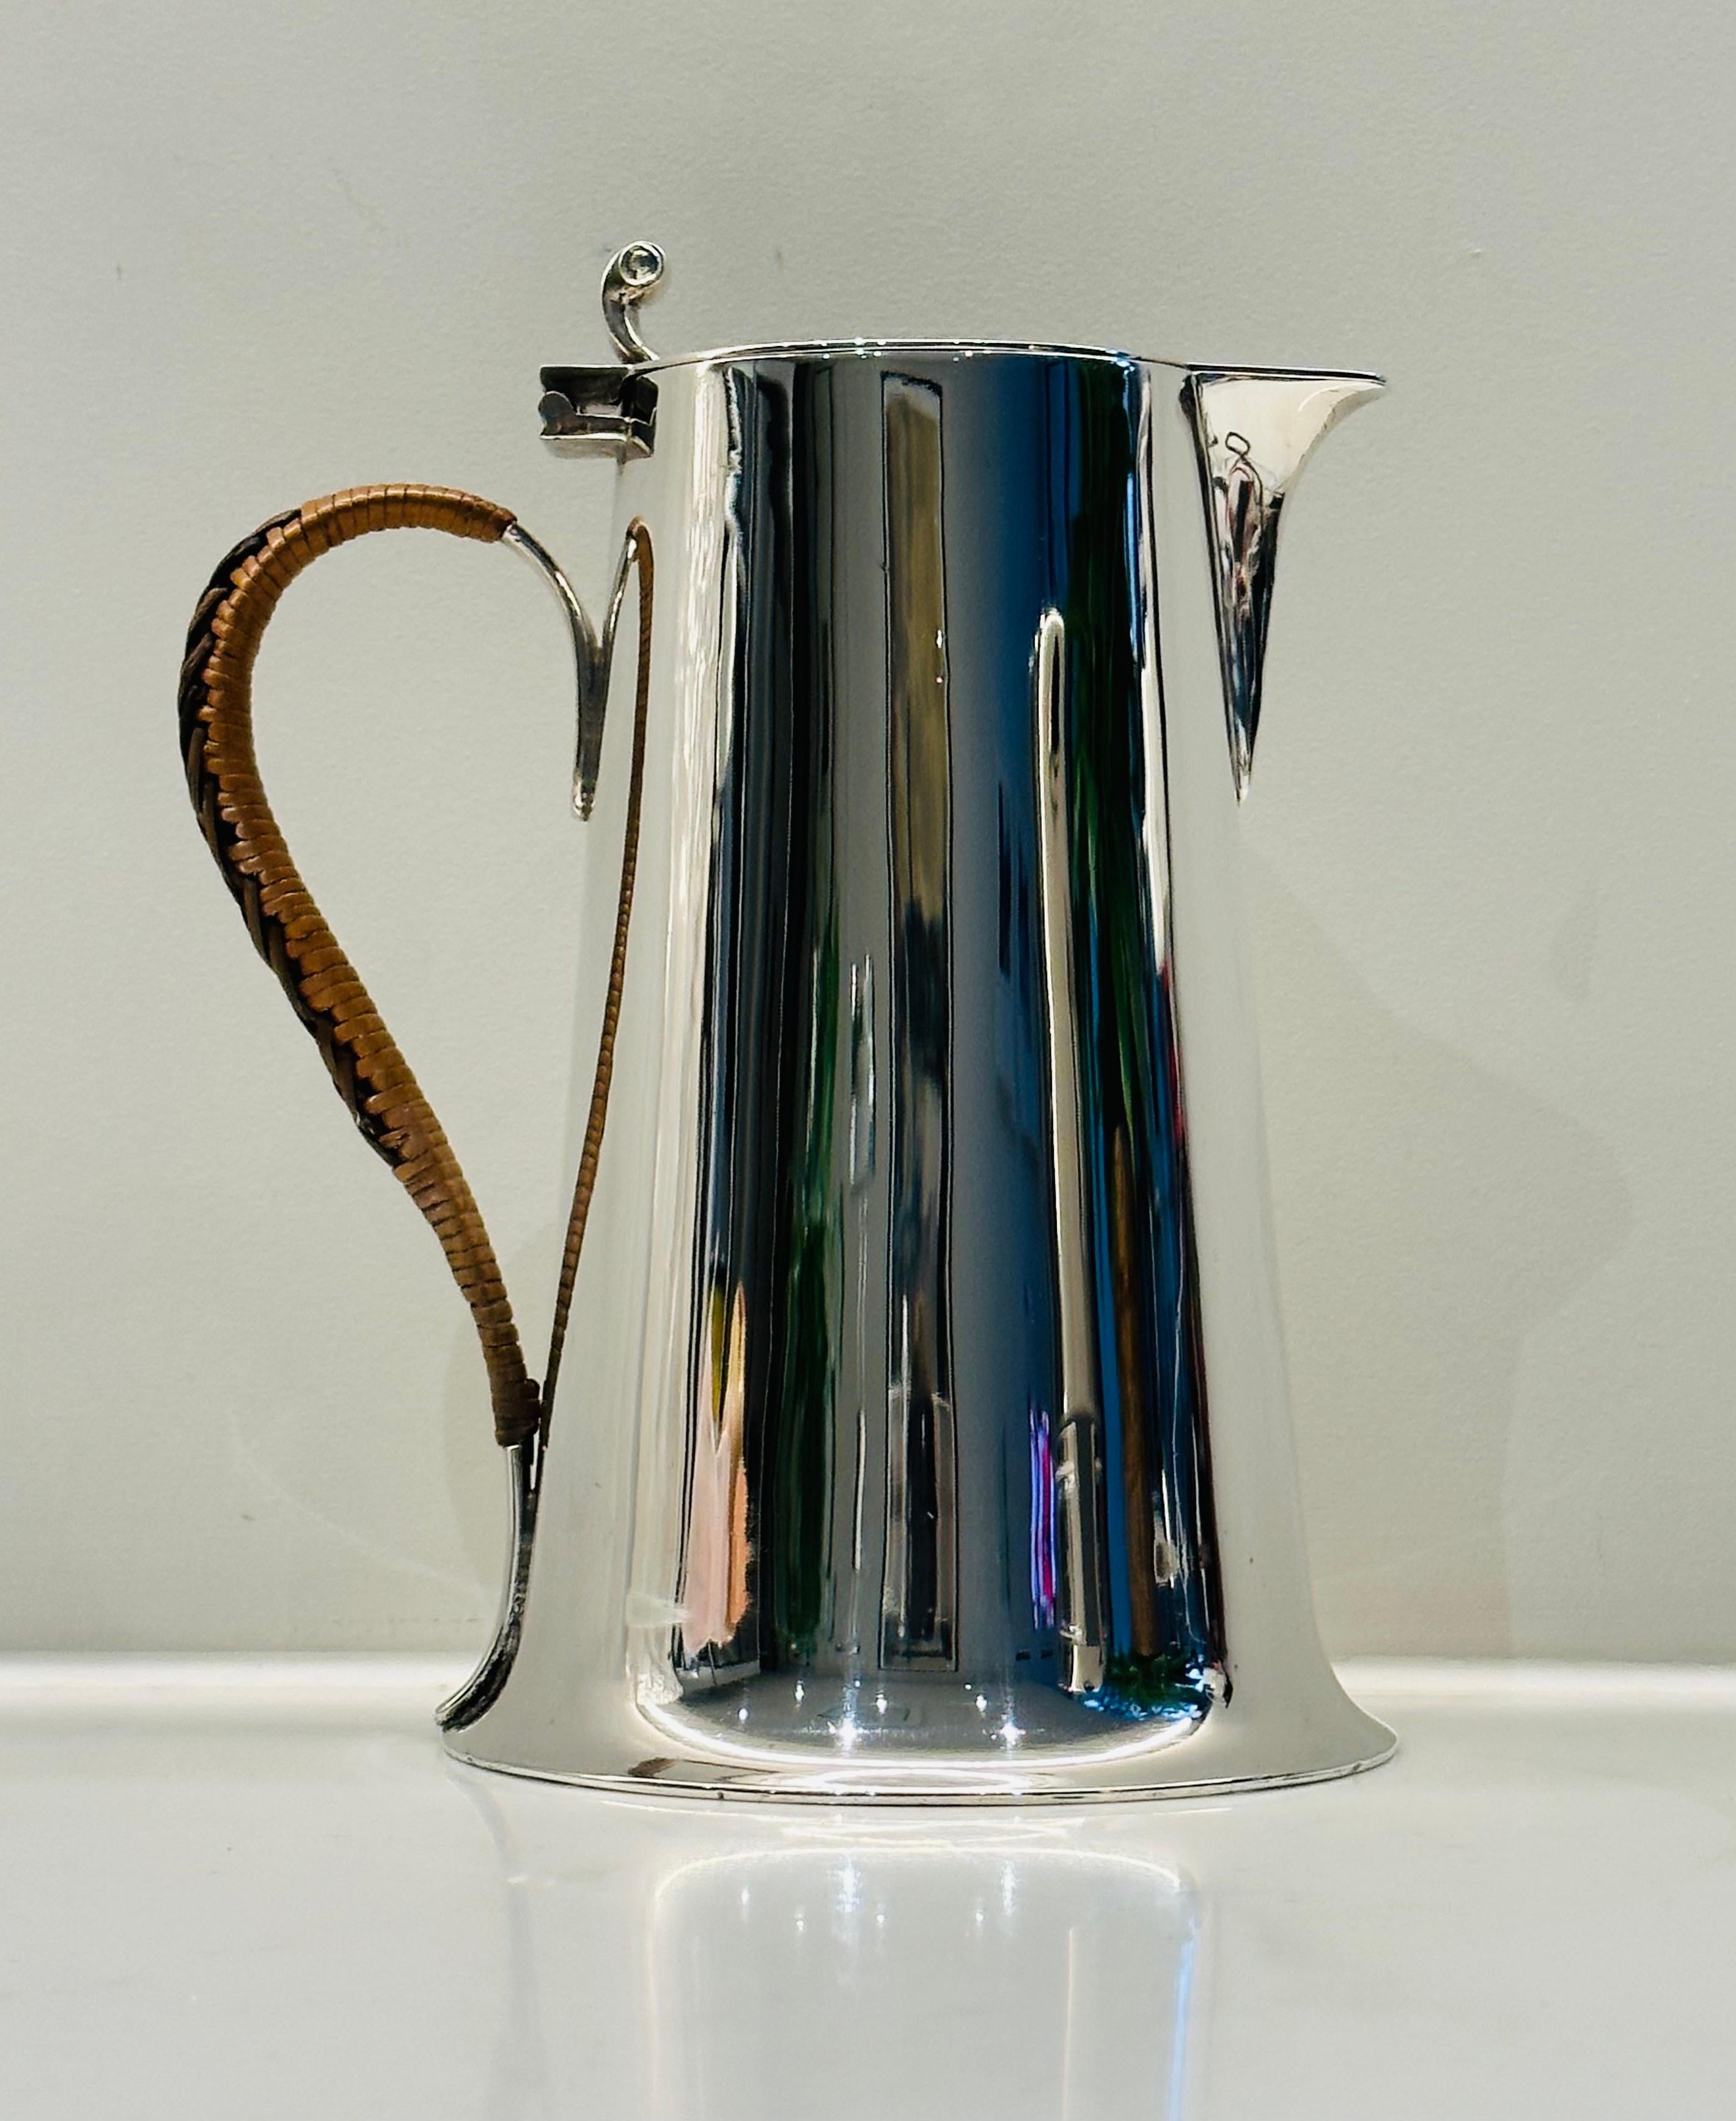 An antique 1920s silver-plated milk jug from the Arts and Crafts era with a rattan two-toned brown looped handle.
Hallmarked: CG & Co.  Silver Plated.
In good vintage condition.  I have detailed in the images a scratch on one side.
 
Dimensions:  H: